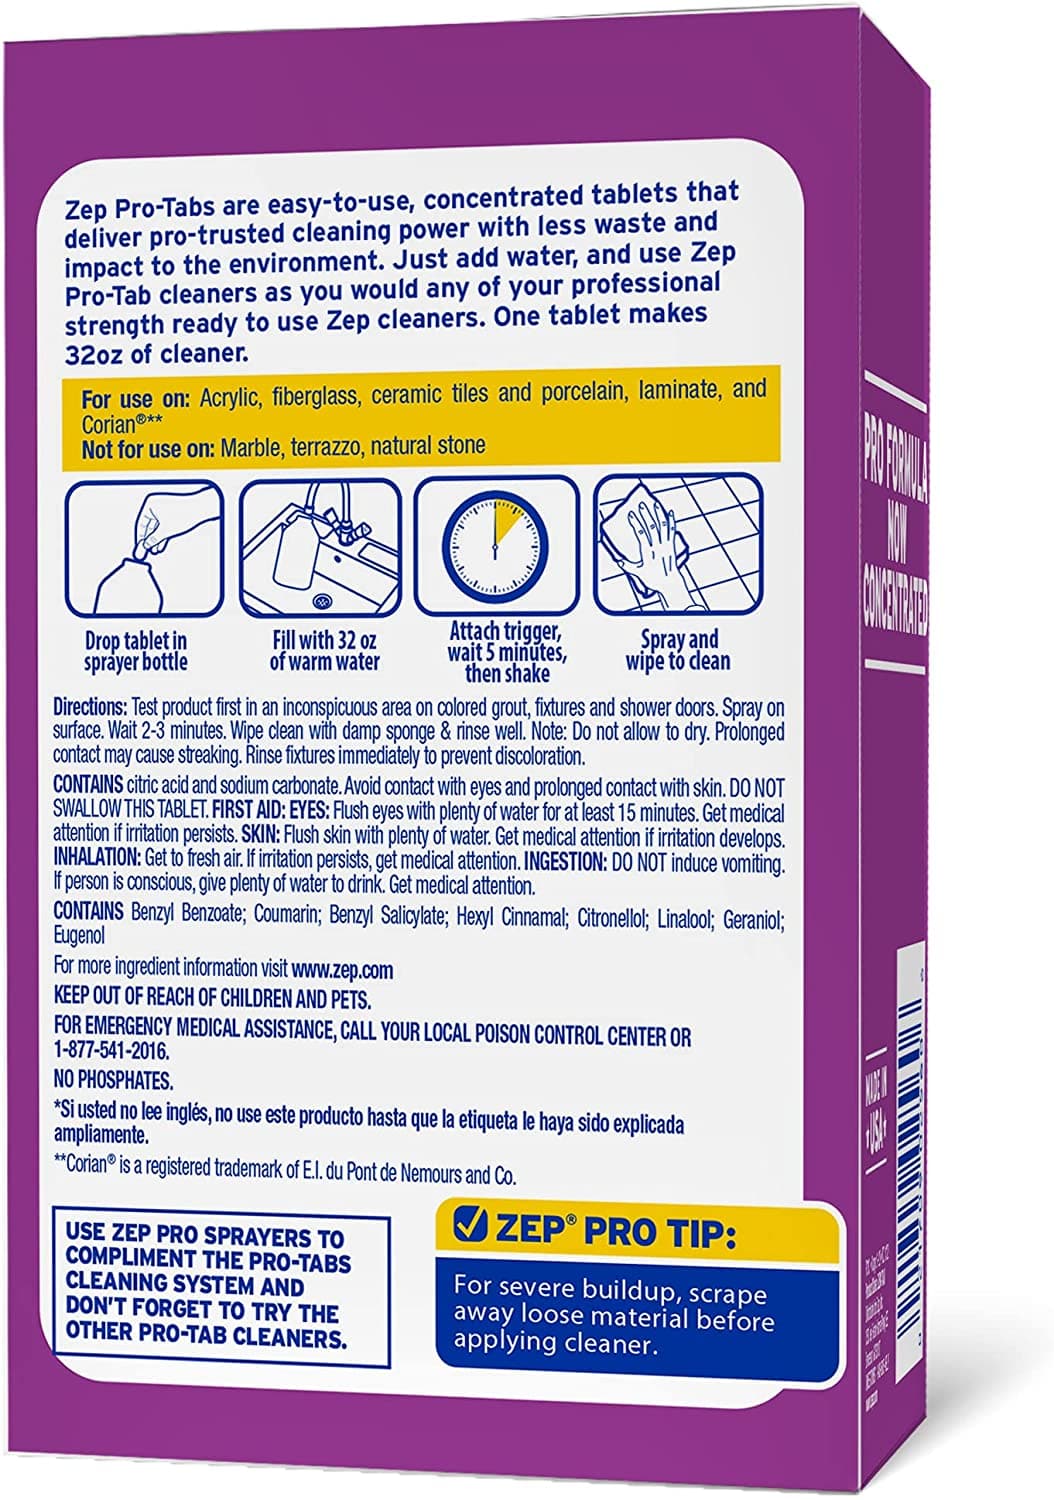 Pro-Tabs Bathroom Cleaner Dissolvable Tablets - 4 Tablets Per Box (10 Pack)